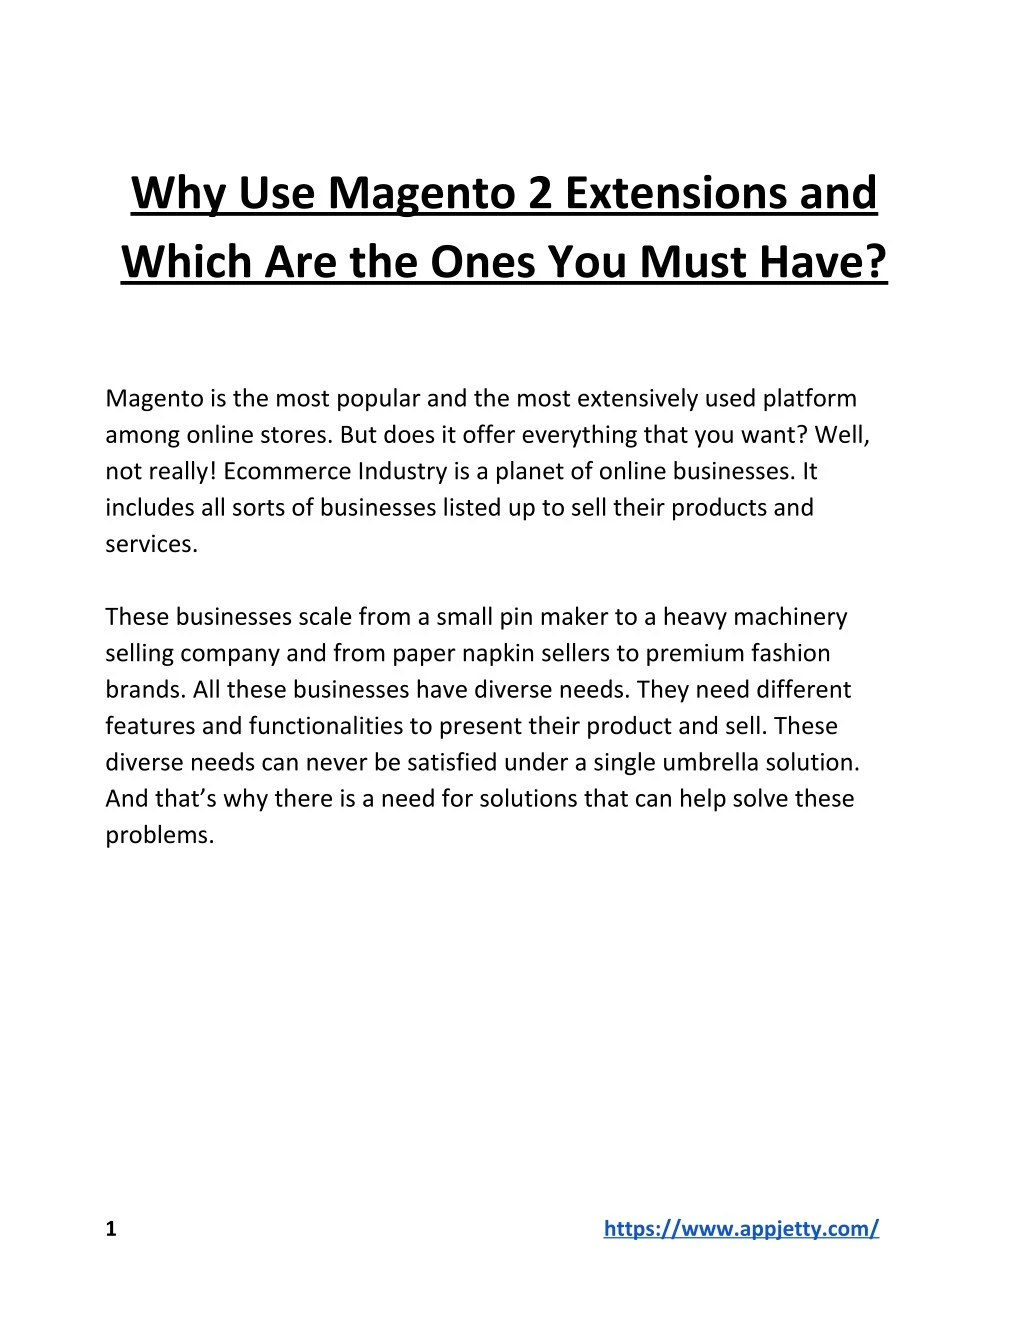 why use magento 2 extensions and which